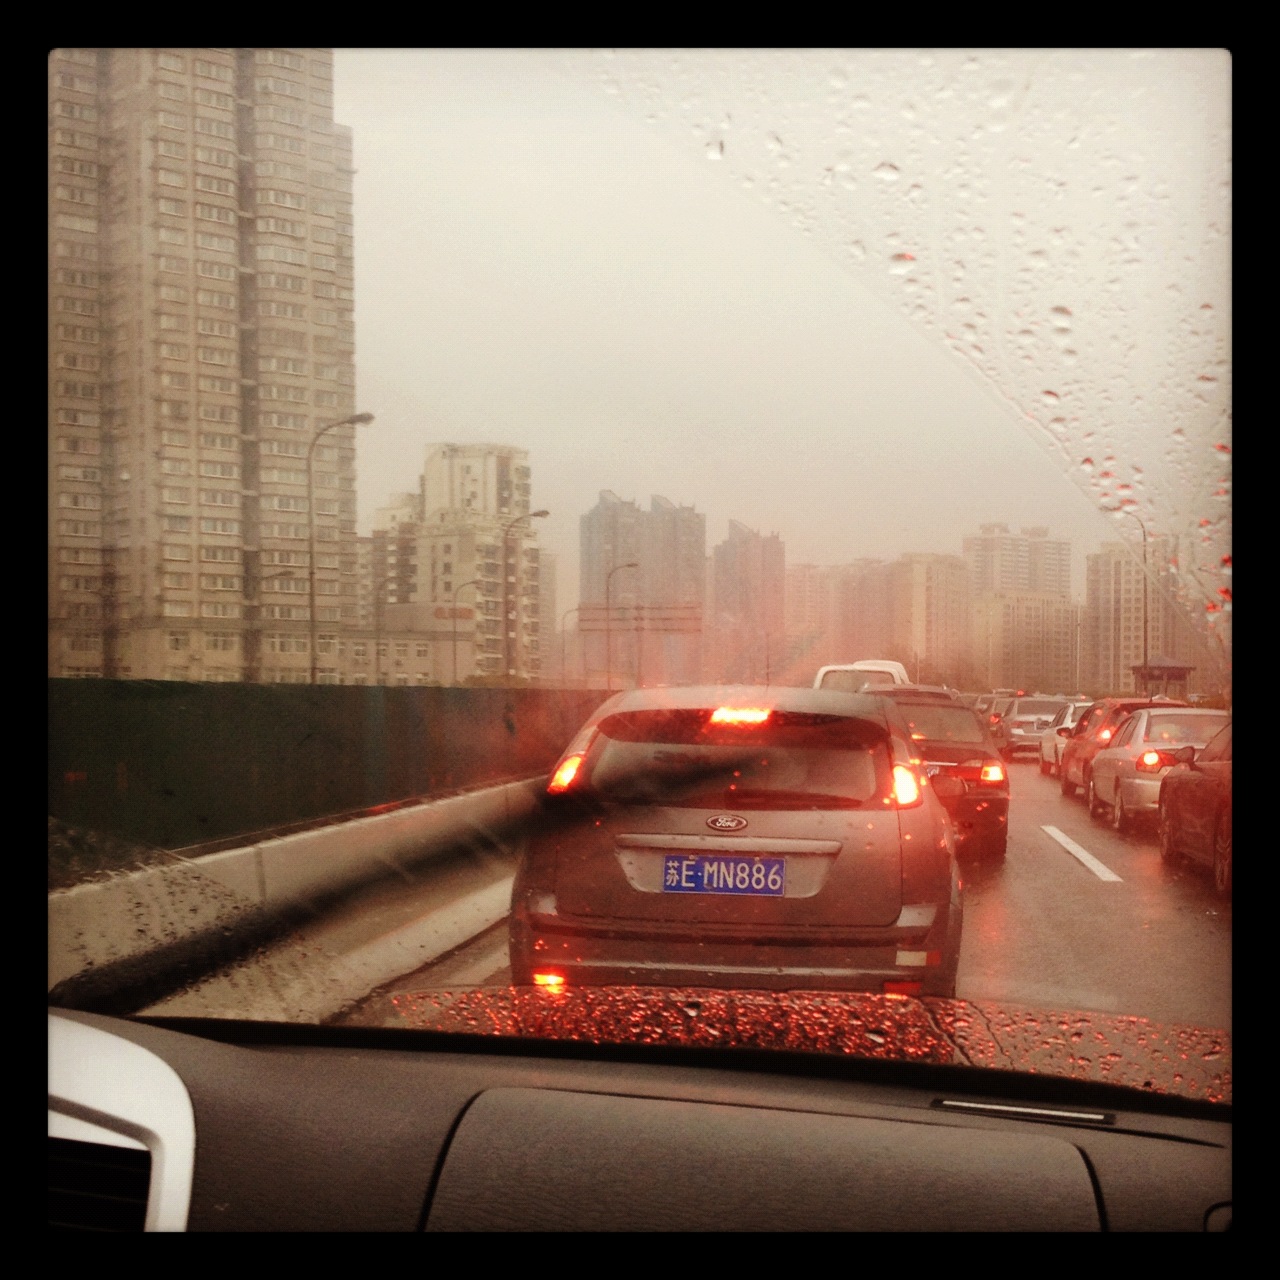 (101 Things About Shanghai) Taxis